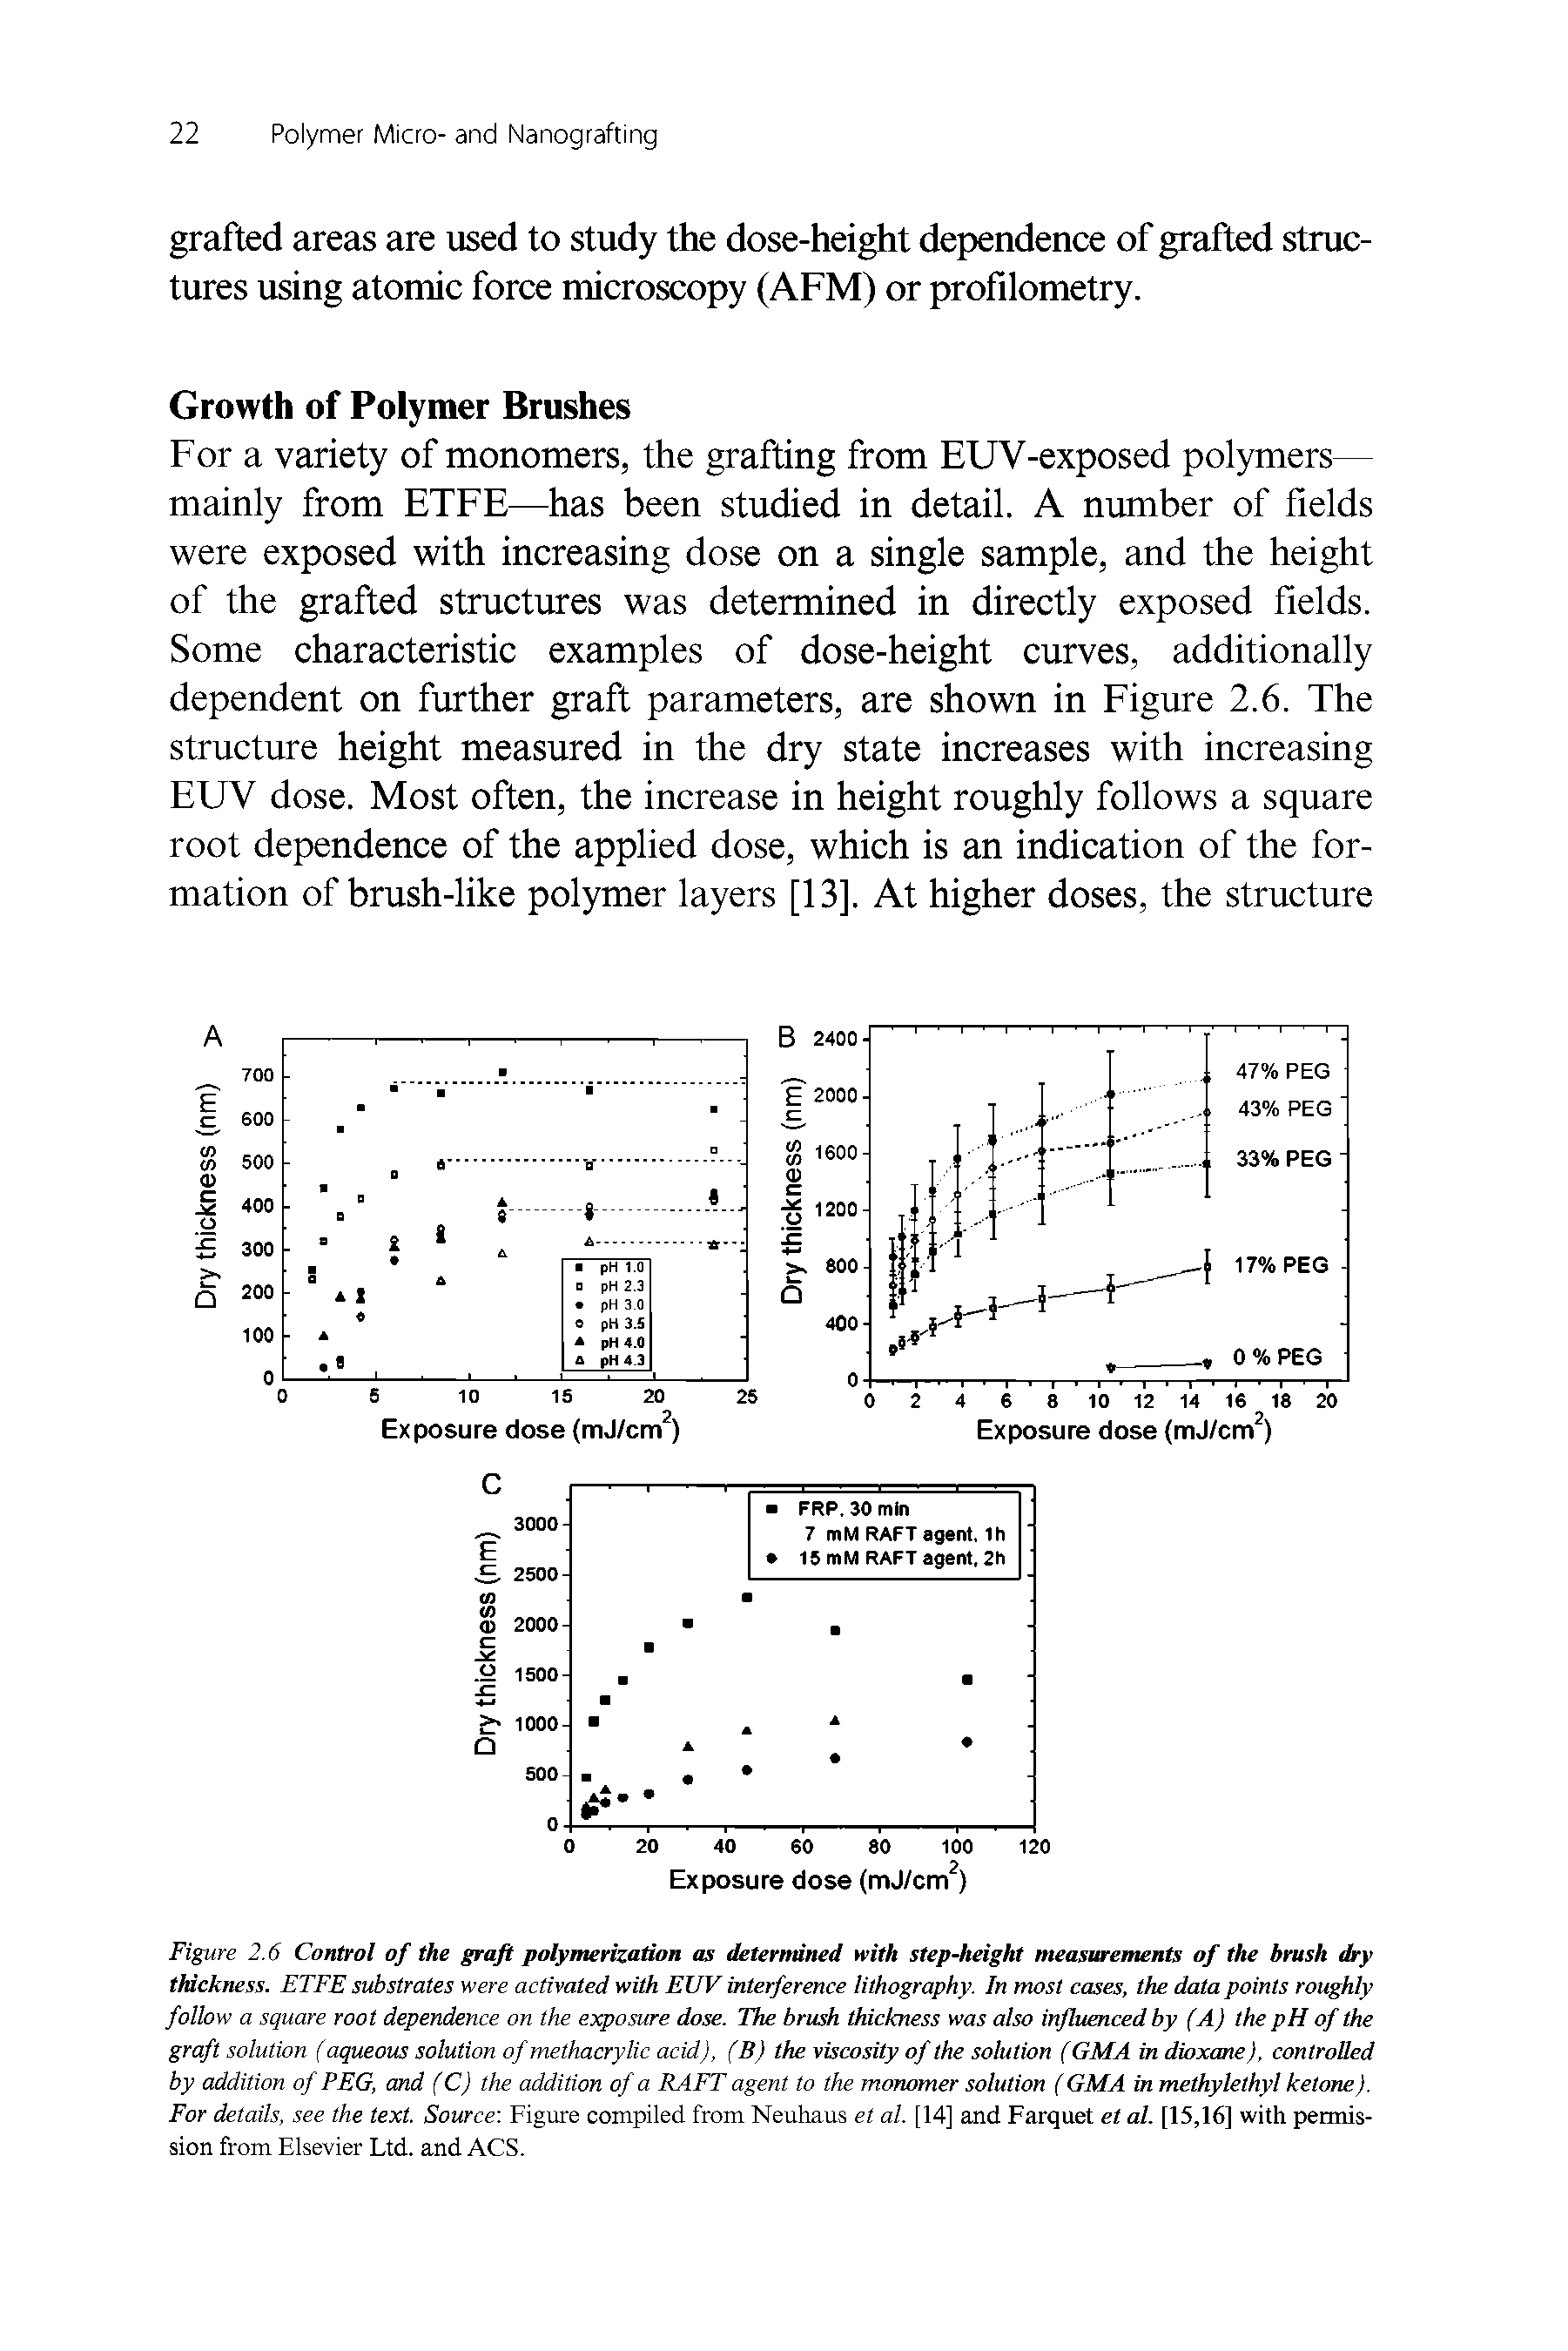 Figure 2.6 Control of the graft polymerization as determined with step height measurements of the brush dry tMckness. ETFE substrates were activated with EUV interference lithography. In most cases, the data points roughly follow a square root dependence on the exposure dose. The brush thickness was also influenced by (A) the pH of the graft solution (aqueous solution of methacrylic acid), (B) the viscosity of the solution (GMA in dioxane), controlled by addition of PEG, and (C) the addition of a RAFT agent to the monomer solution (GMA in methylethyl ketone). For details, see the text. Source Figure compiled from Neuhaus et al. [14] and Parquet et al. [15,16] with permission from Elsevier Ltd. and ACS.